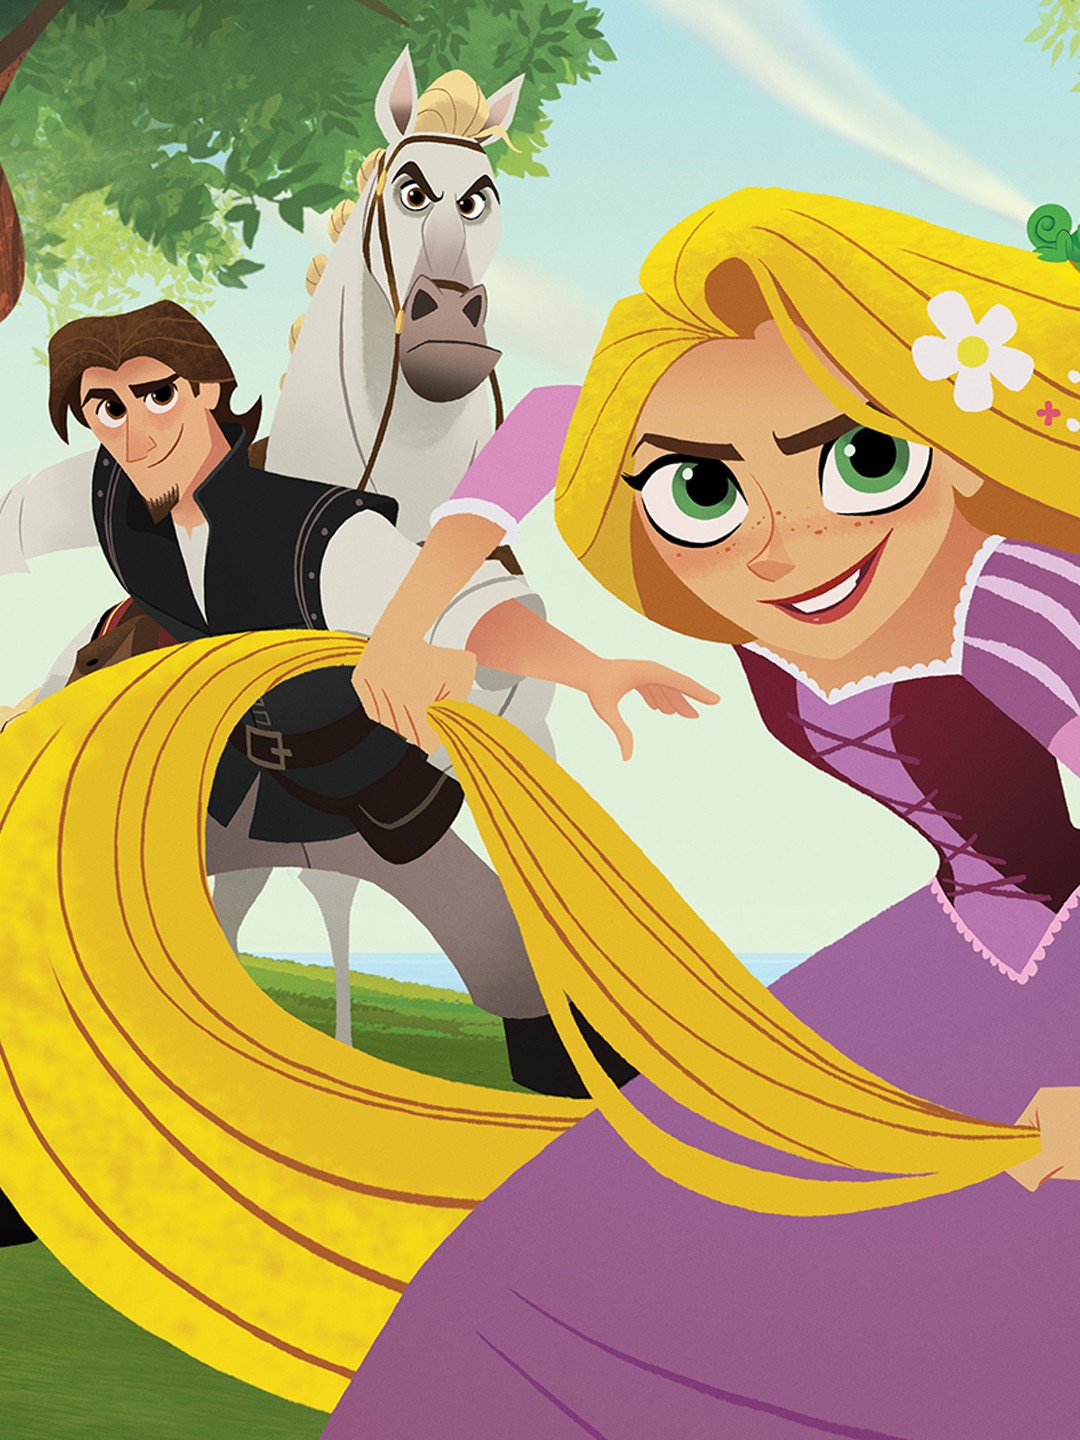 Tangled: Before Ever After Review - IGN